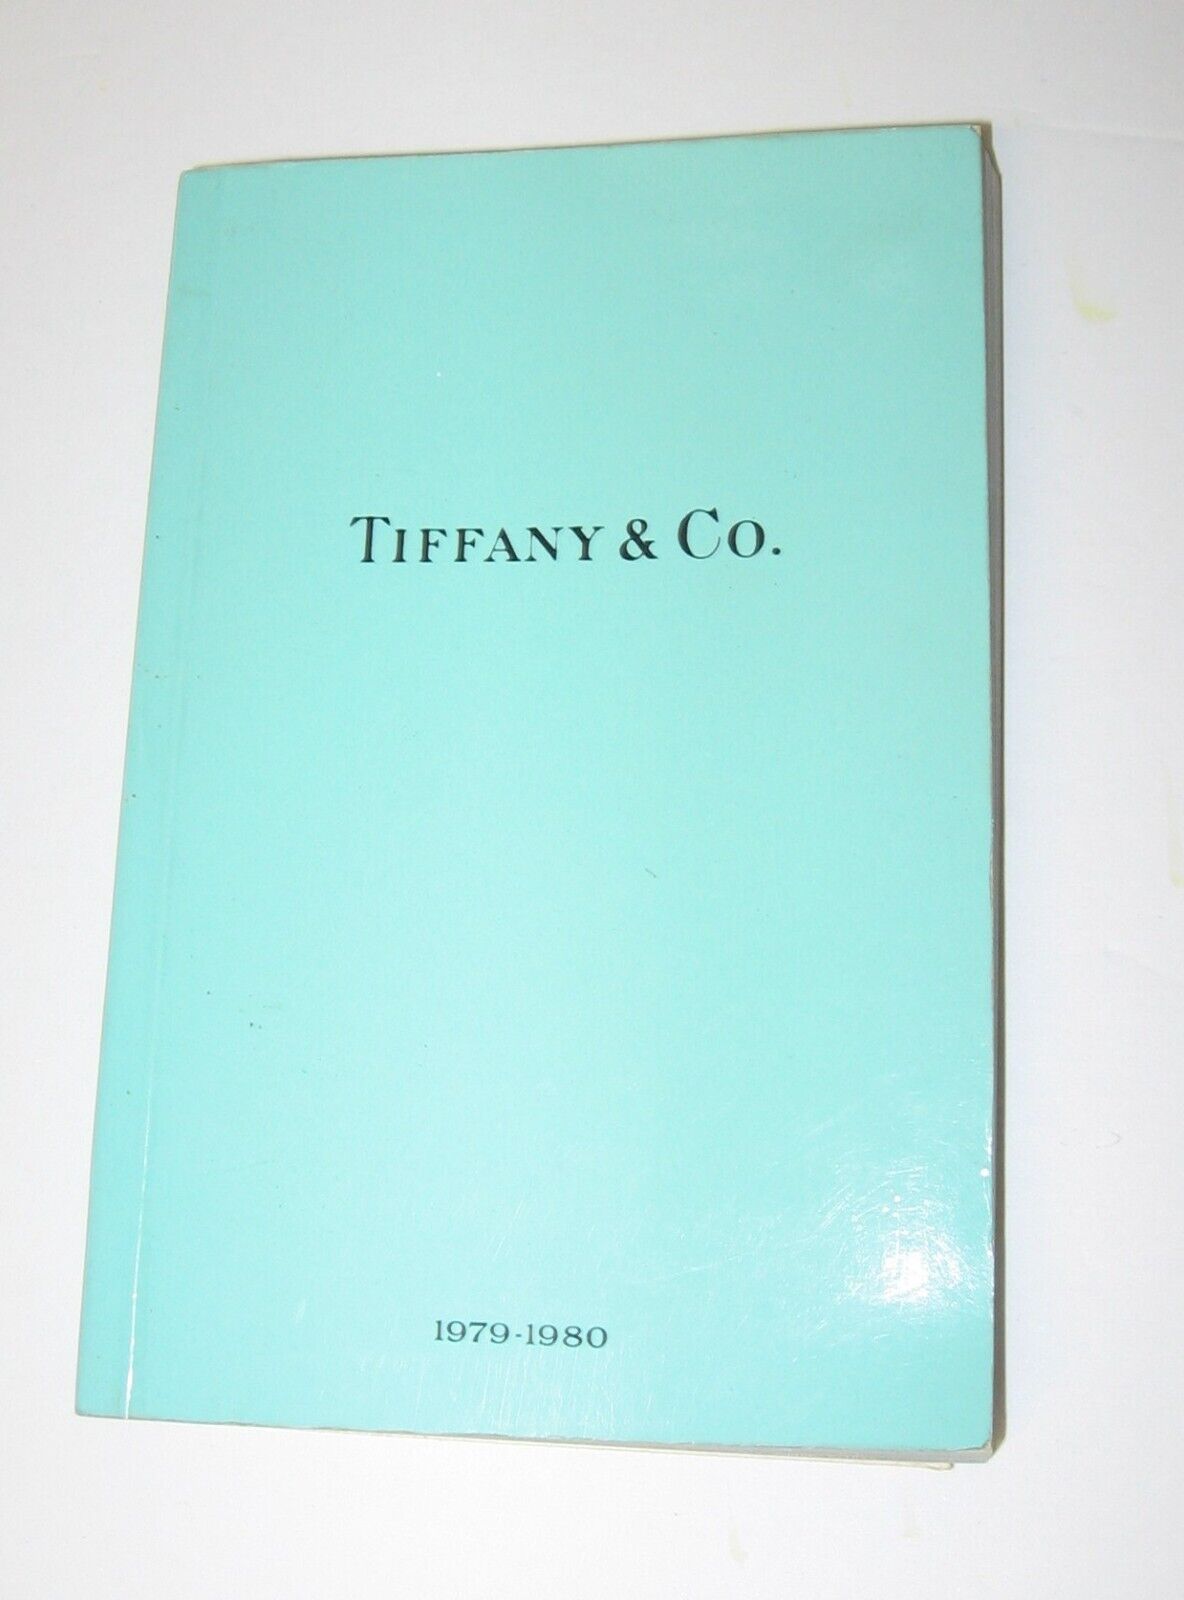 Rare 1979-80\' Tiffany & Co. 5th Ave. New York Catalog-Items & prices-Illustrated